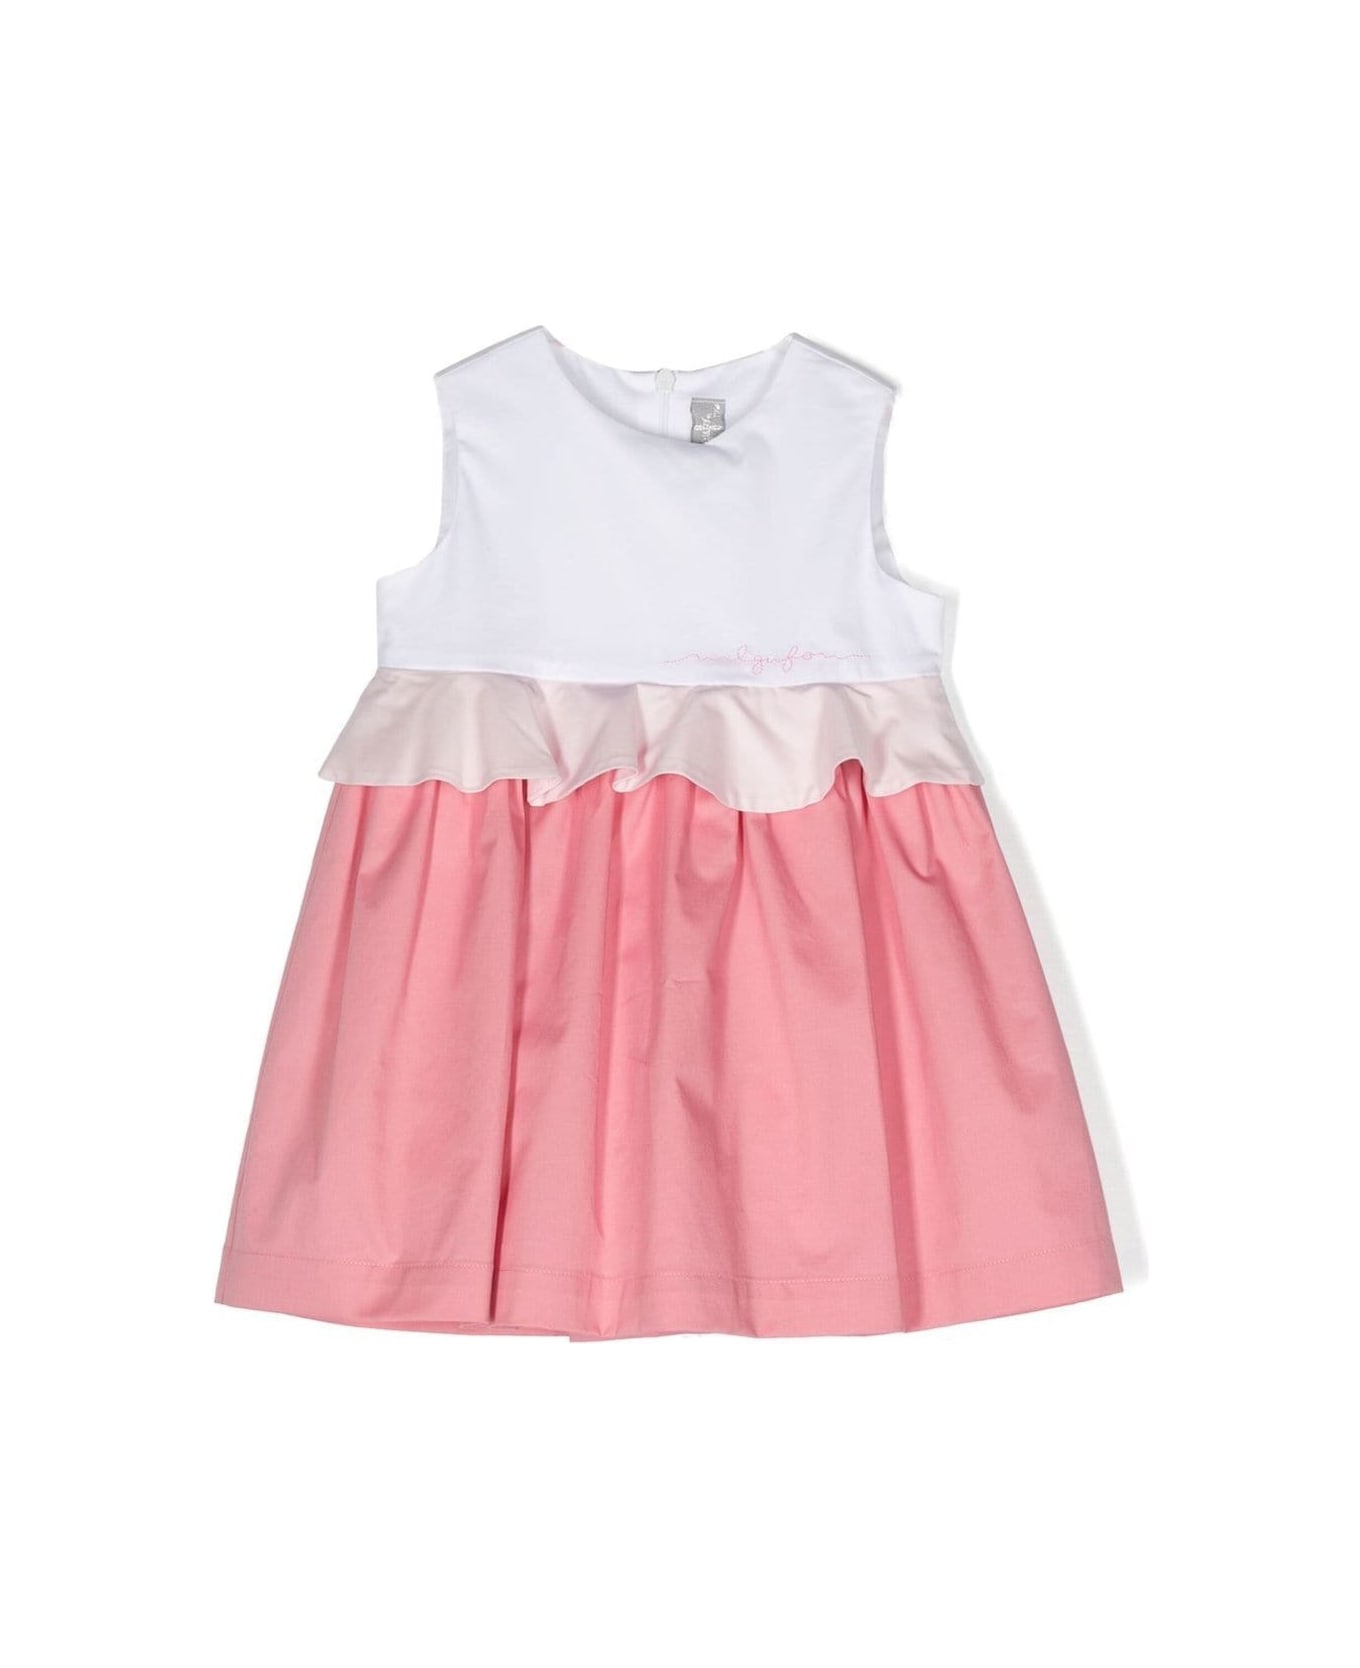 Il Gufo White And Pink Sleeveless Dress With Ruffle Detailing In Cotton Stretch Girl - Multicolor